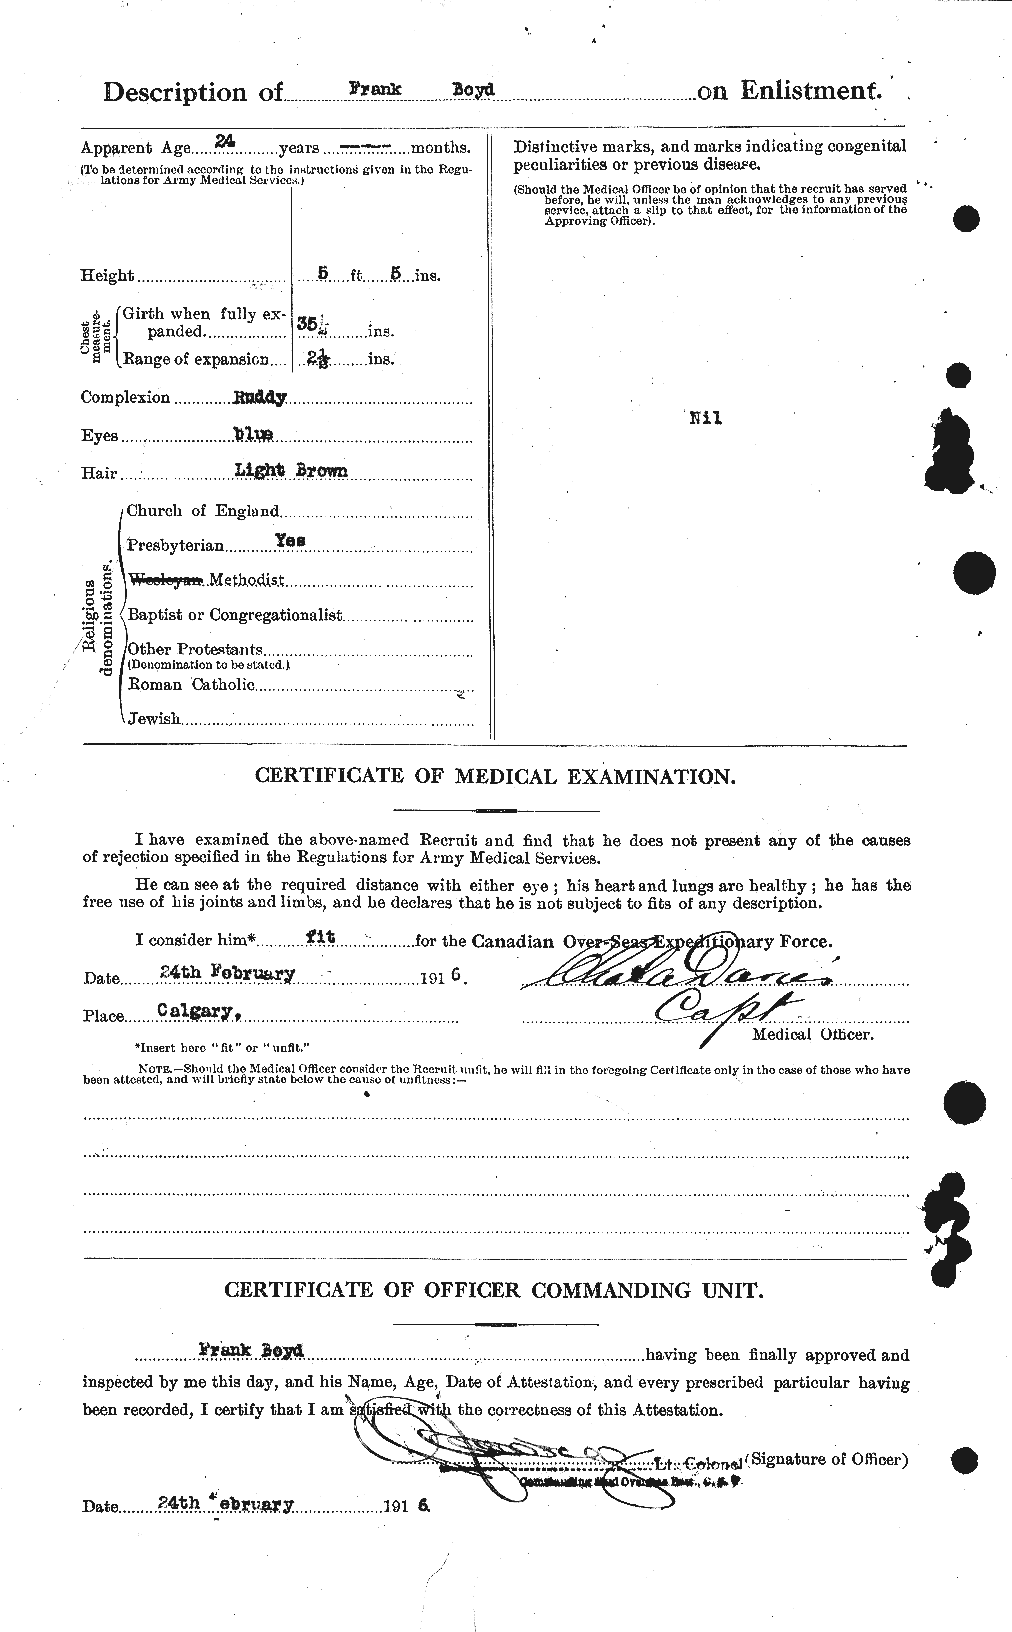 Personnel Records of the First World War - CEF 256973b